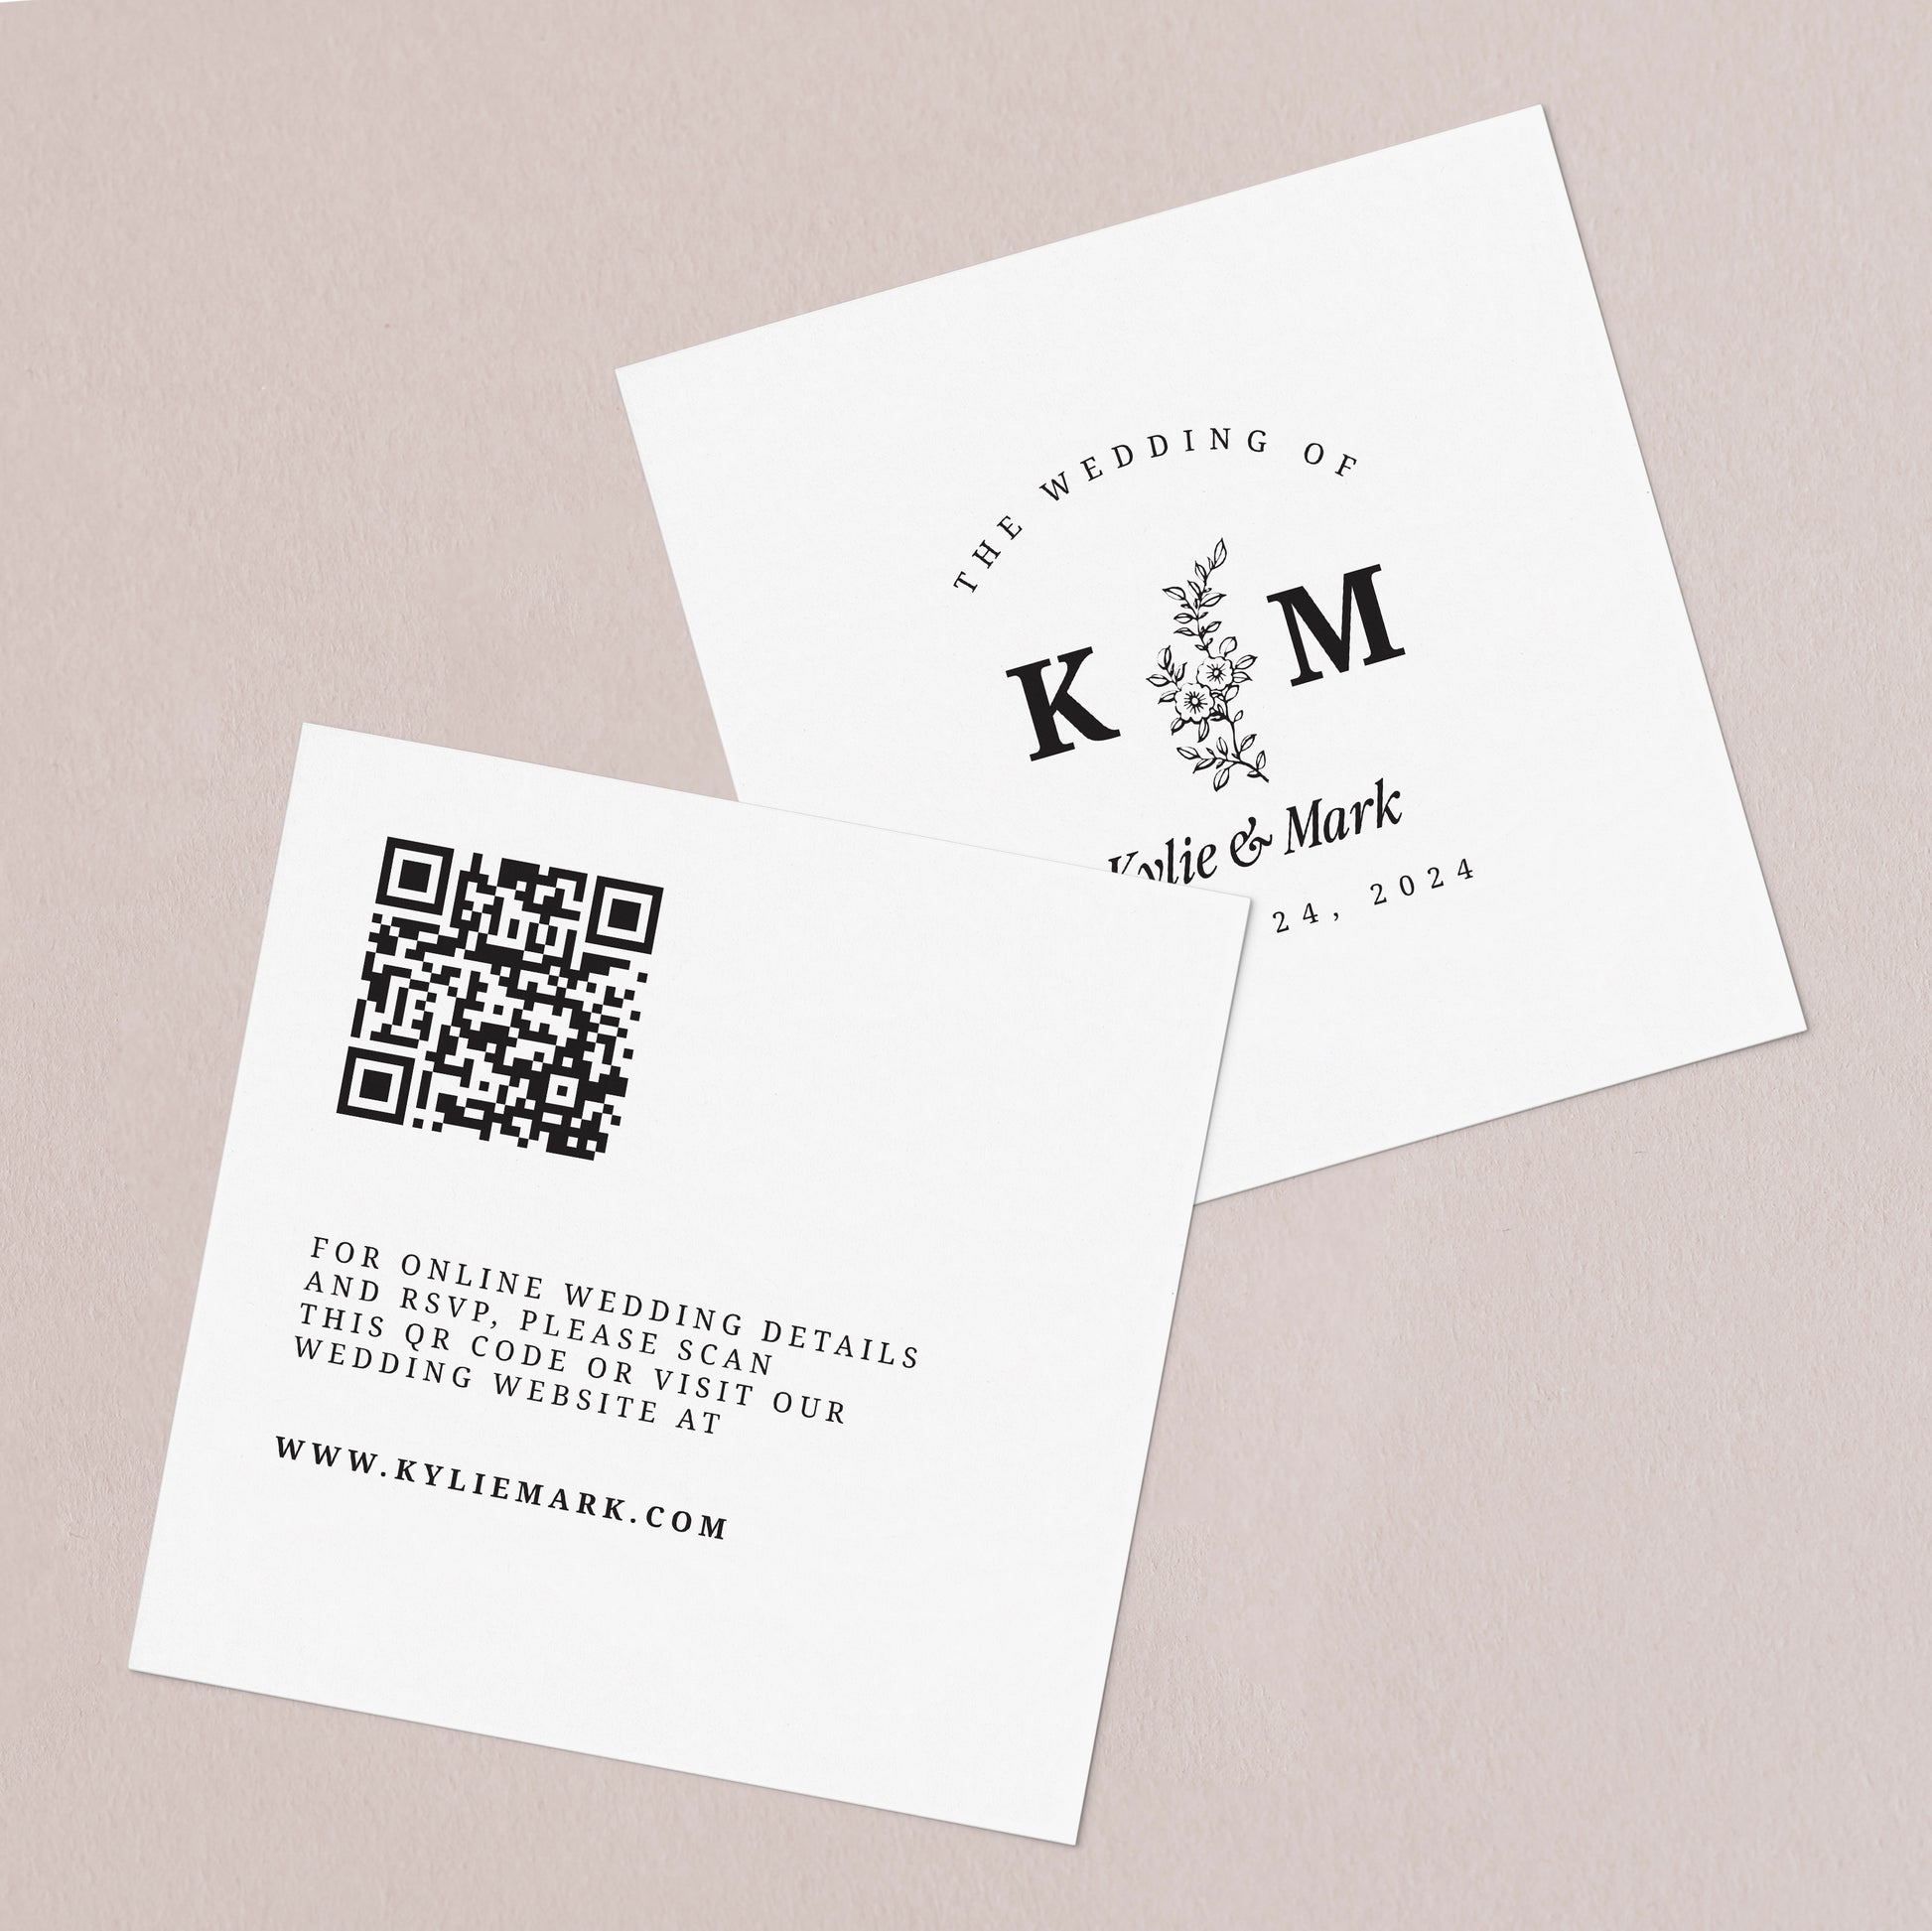 square wedding website cards with monograms, qr code and flowers - XOXOKristen